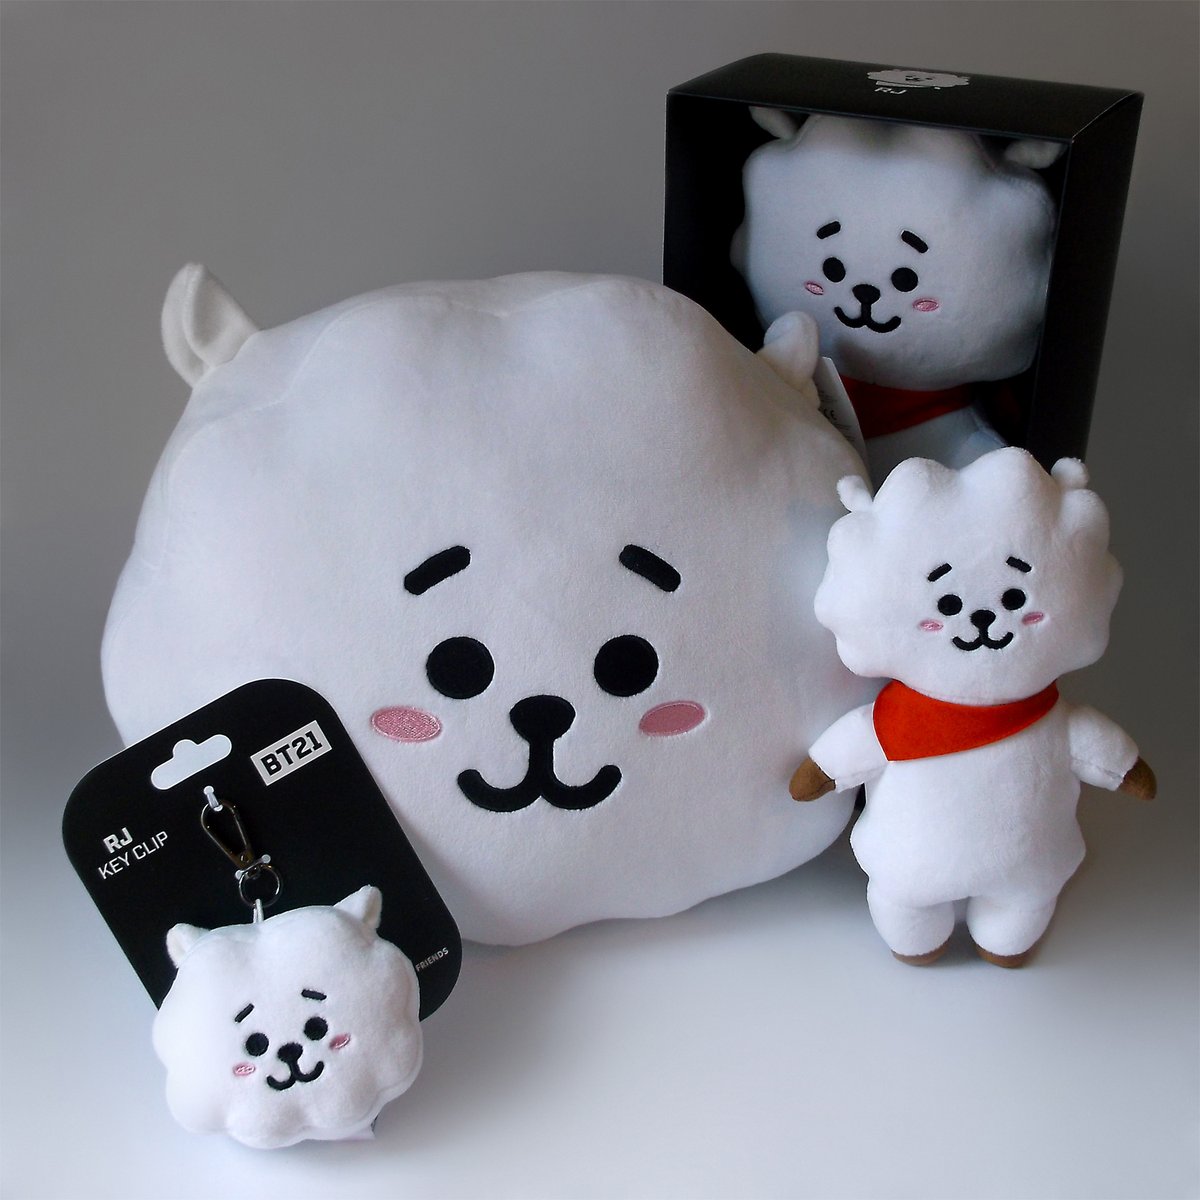 Genki Gear On Twitter A Restock Of Bt21 Rj Plushies Has Arrived Today These Always Sell Out Crazy Fast Just Warning You Available On Our Website Now Https T Co 2viazy9wnx All 100 Official Bt21